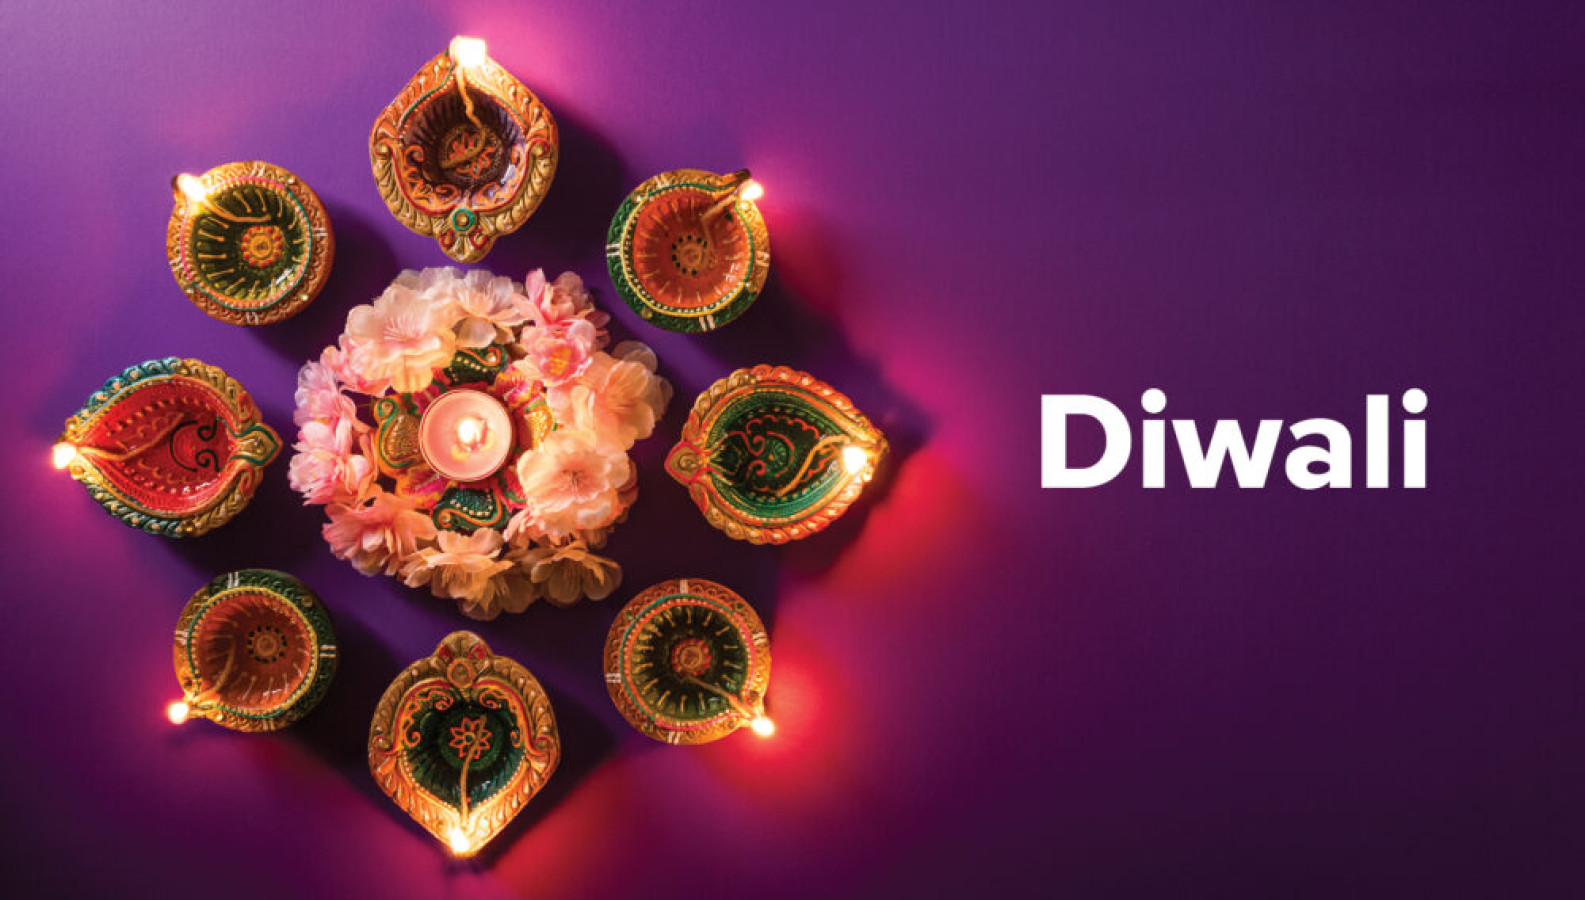 integrated-diwali-celebration:-customs,-design,-present-giving,-green-activities,-clothing,-and-art